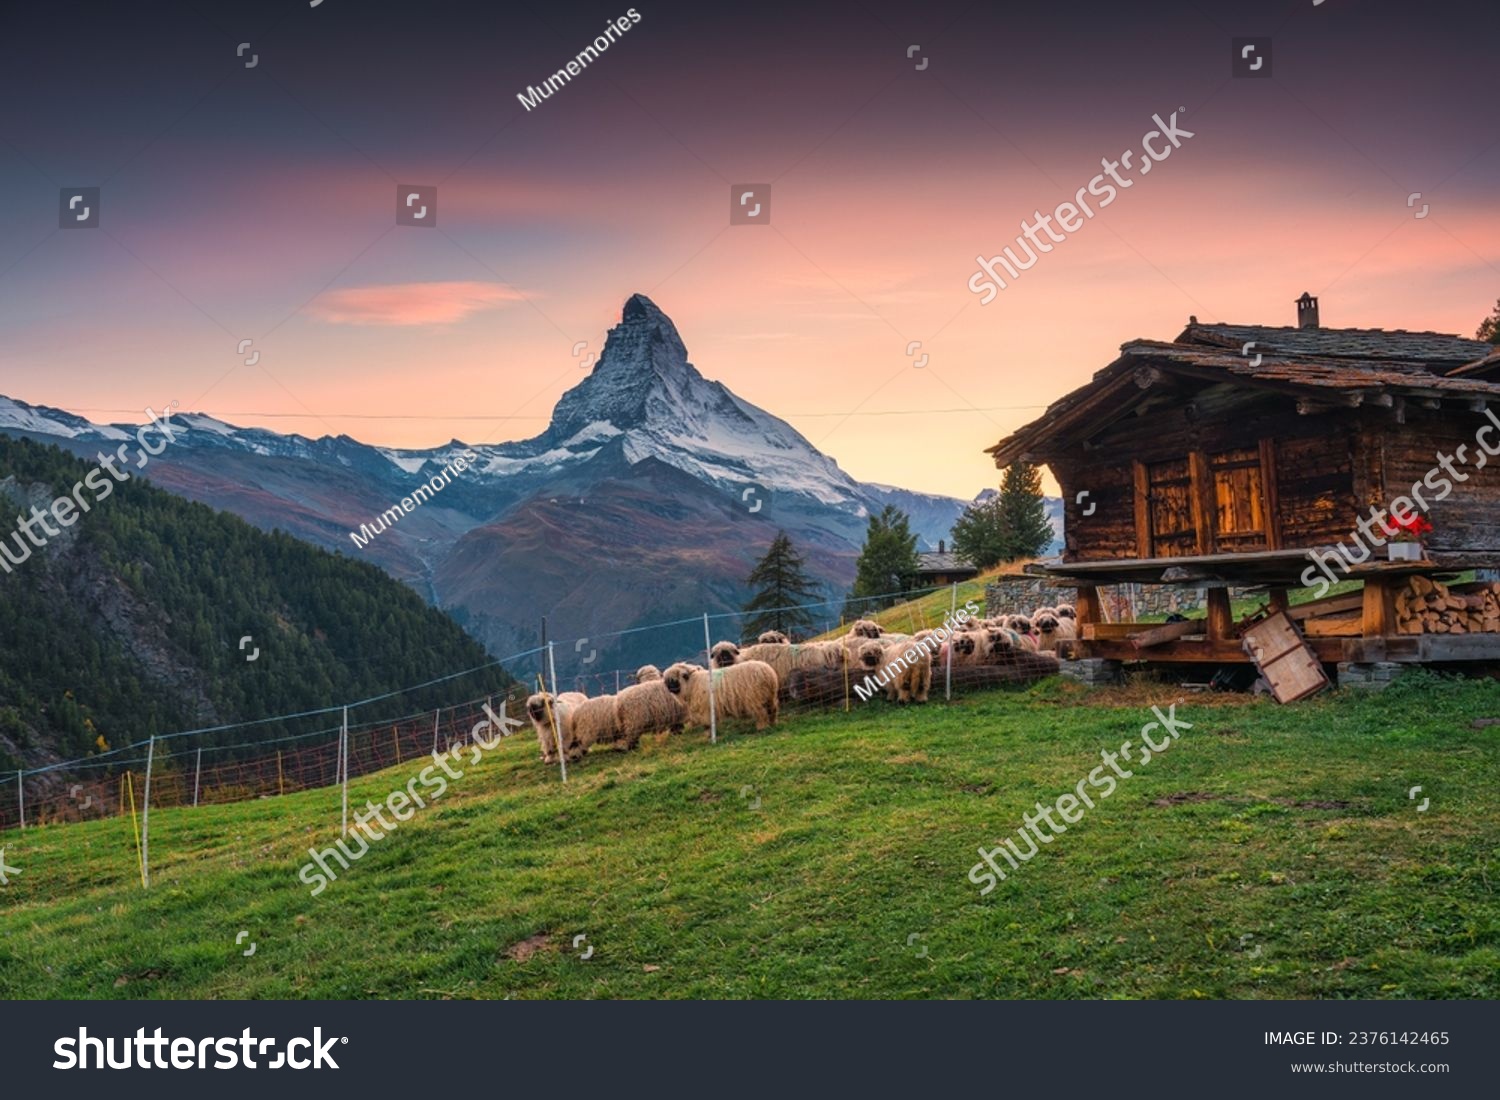 Beautiful landscape of sunset over Matterhorn iconic mountain, Swiss alps with flock of Valais blacknose sheep in stallation and wooden hut on hill at Zermatt, Switzerland #2376142465